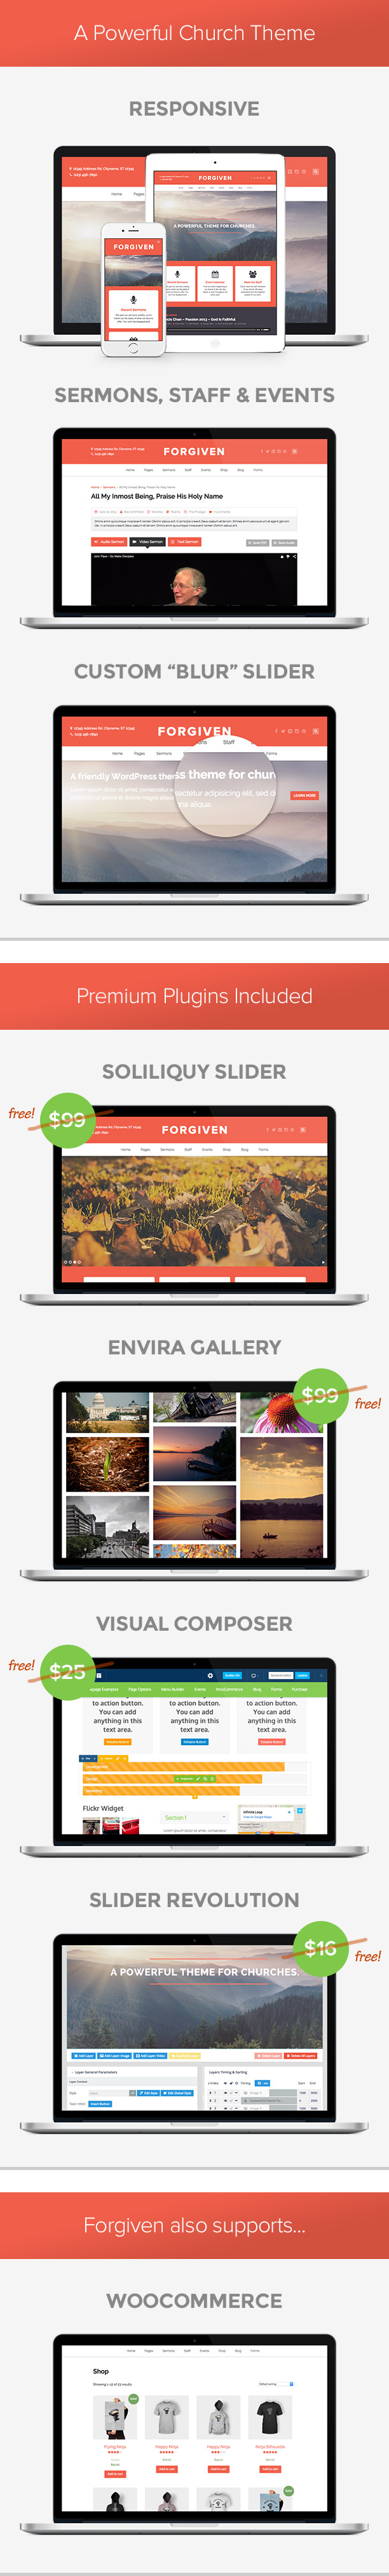 fg images - Forgiven - A WordPress Theme for Churches